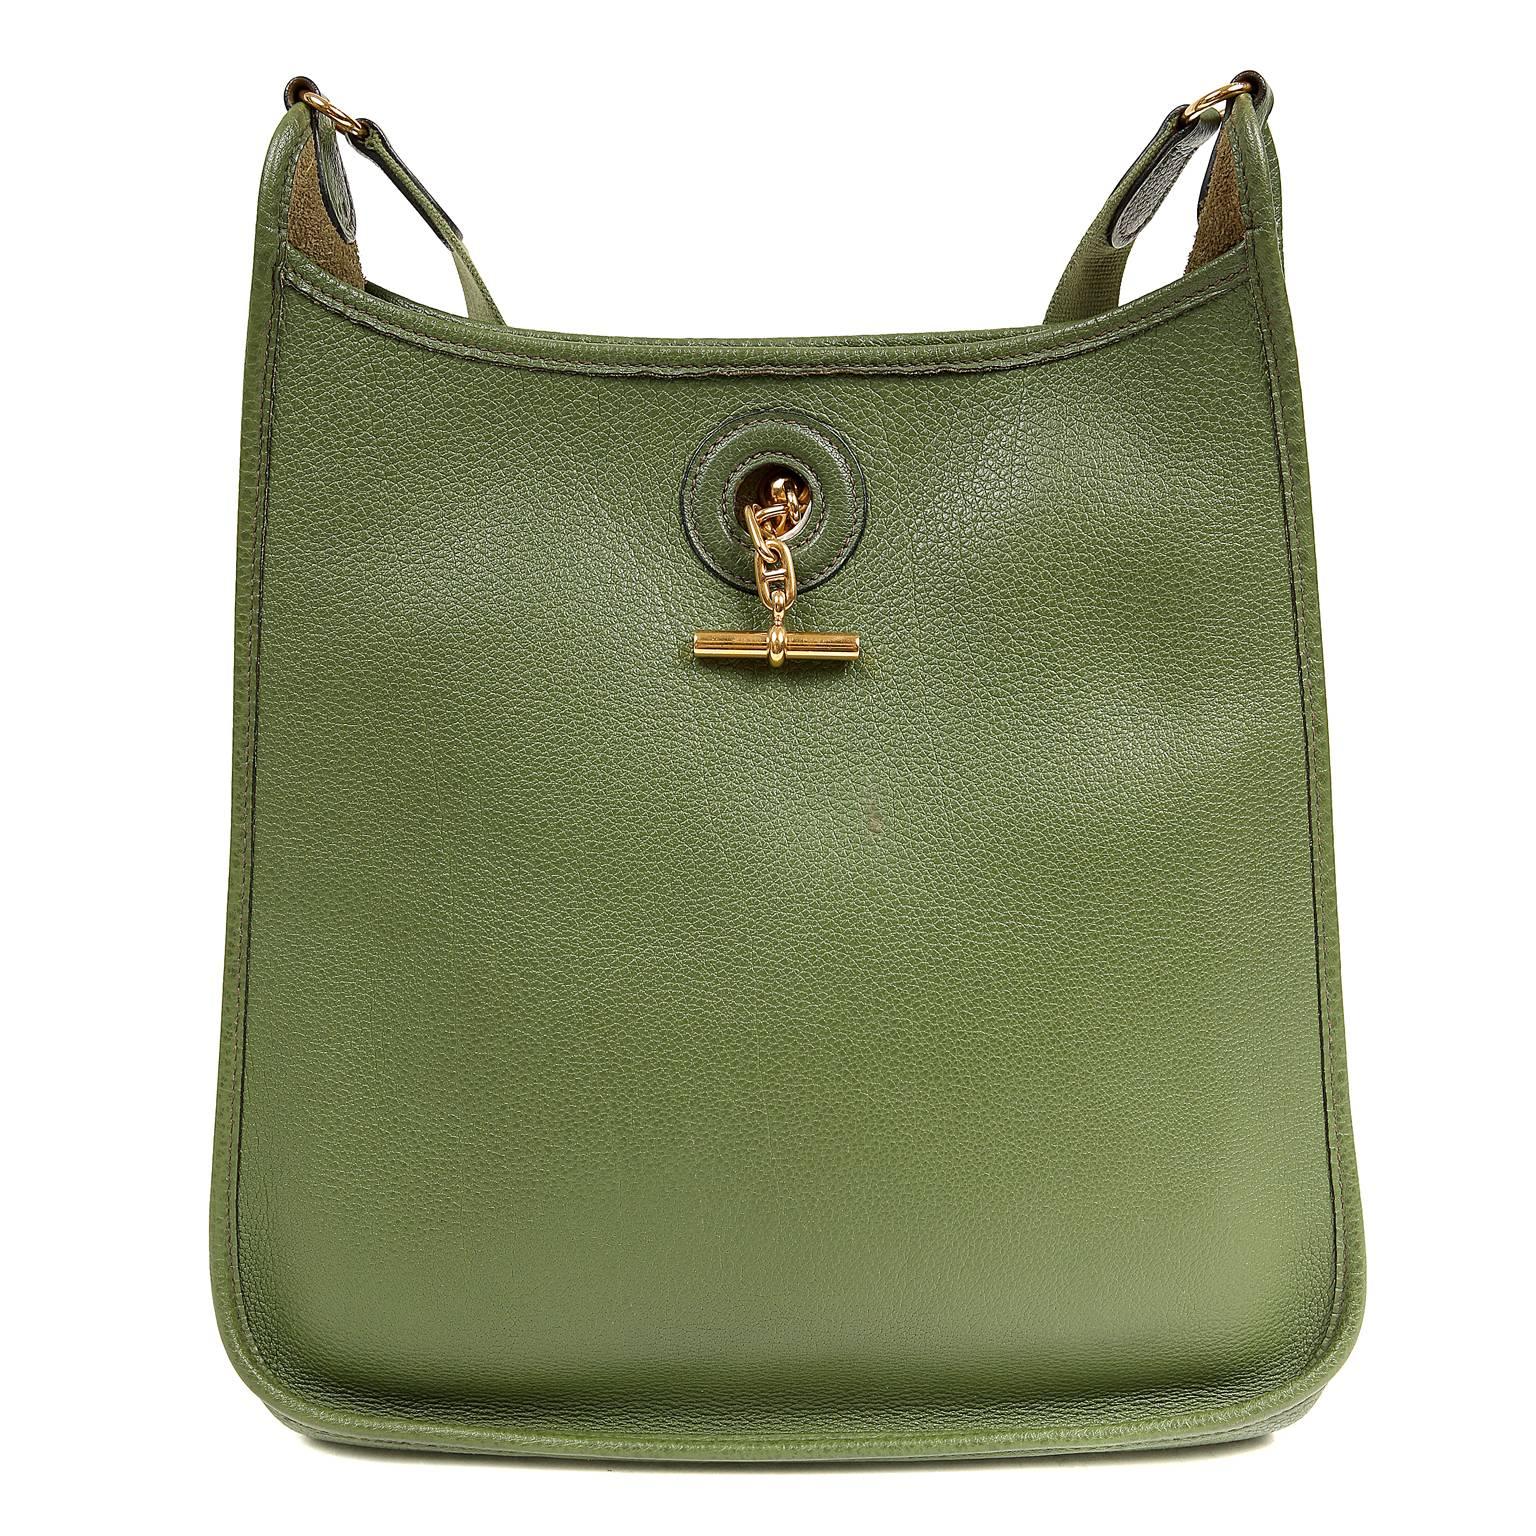 Hermès Bengal Green Togo Vespa Bag is in excellent condition.  Before the Evelyne, the Vespa was the everyday cross body of choice. This neutral green Togo version is a fantastic find.

 Togo is a scratch resistant calf leather with a wonderful